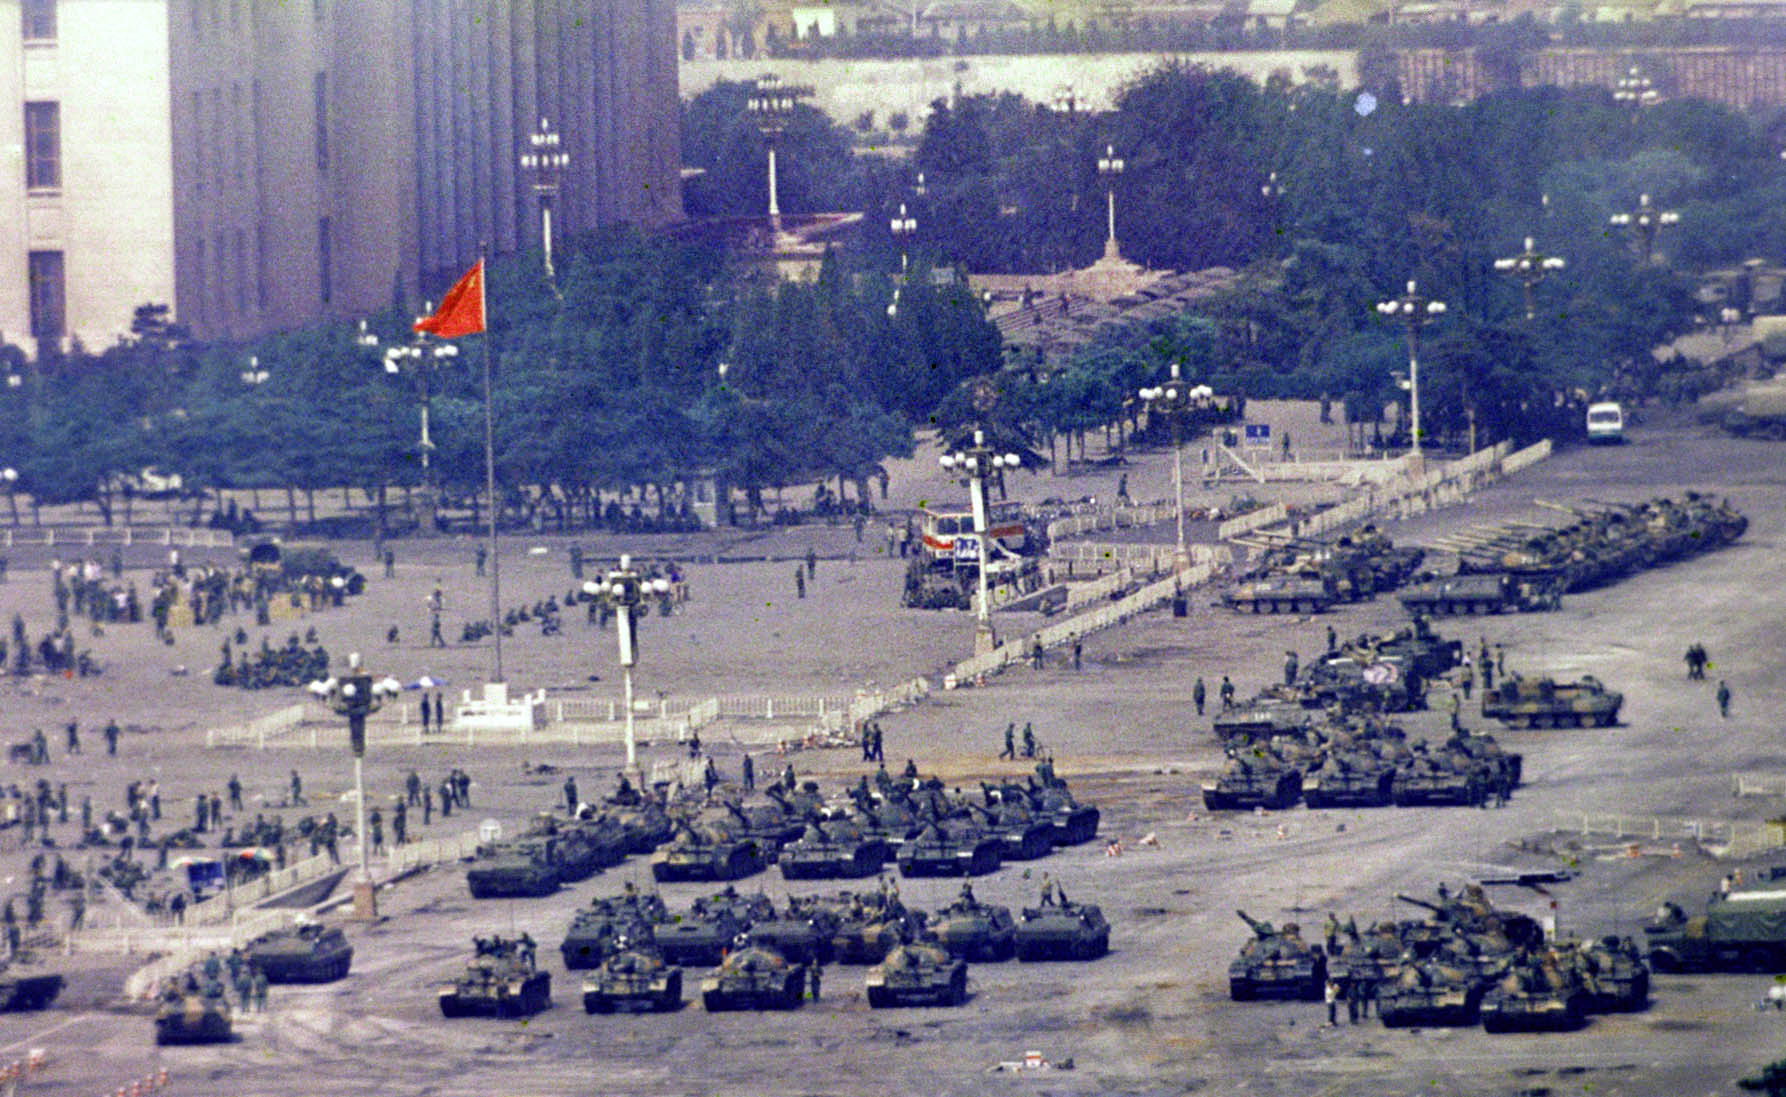 As it happened June 4-5, 1989: Tanks rumble out of Tiananmen Square | The  Times of Israel